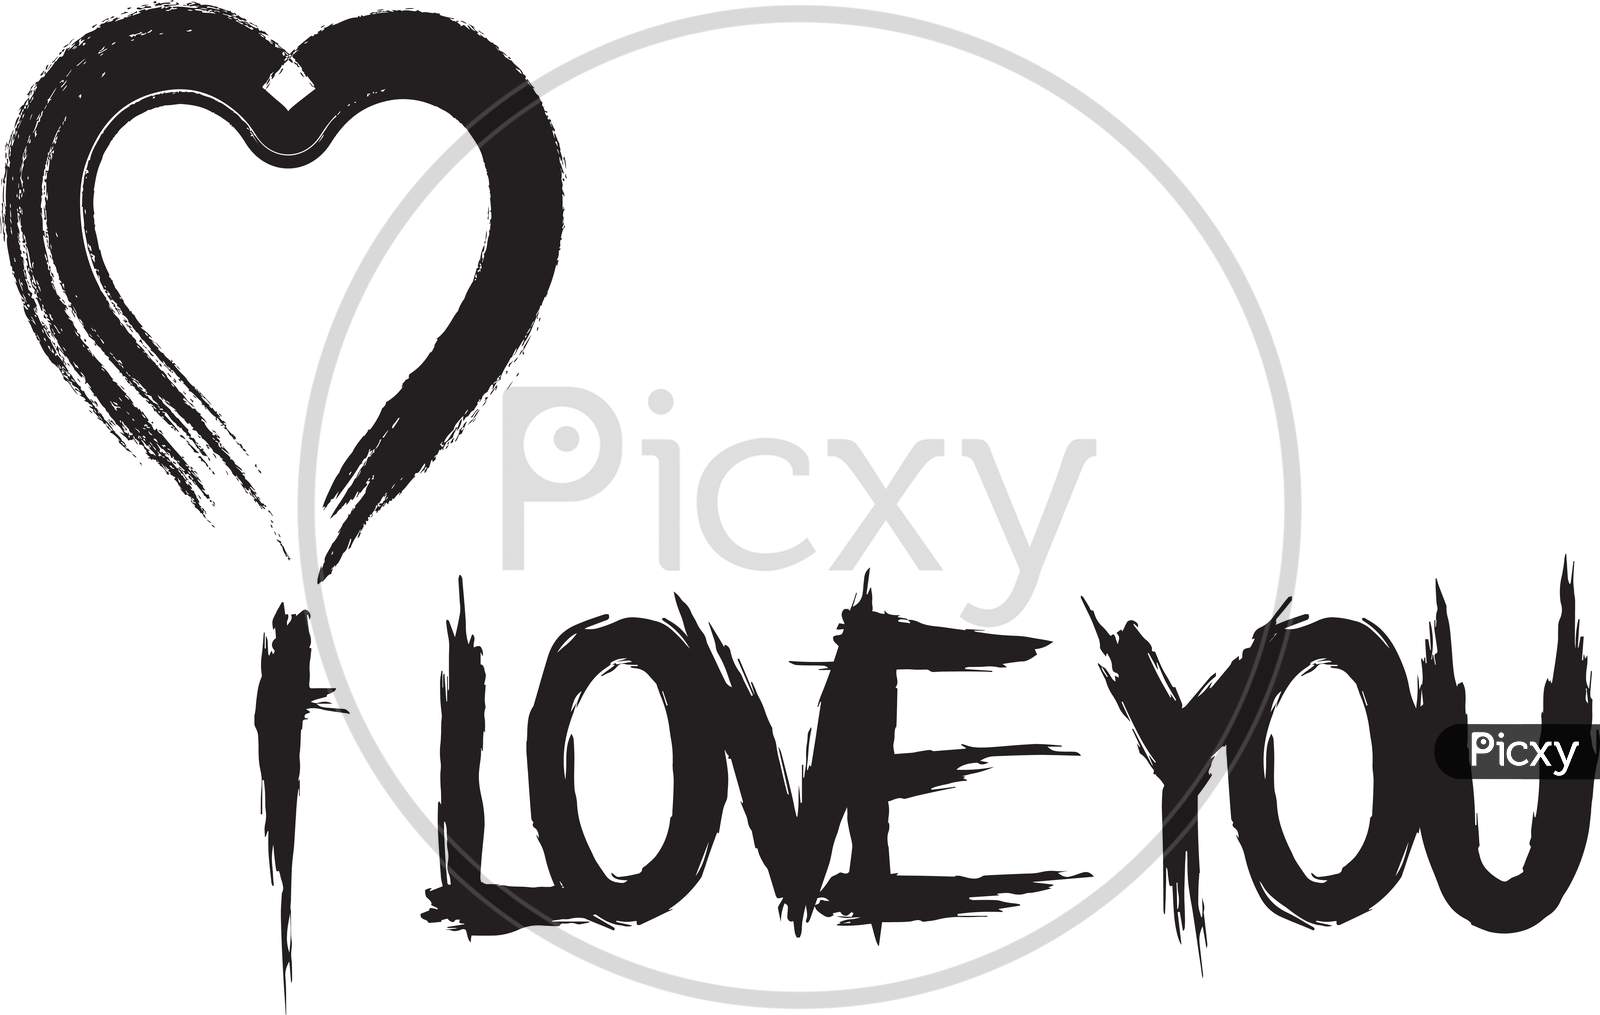 i love you images black and white